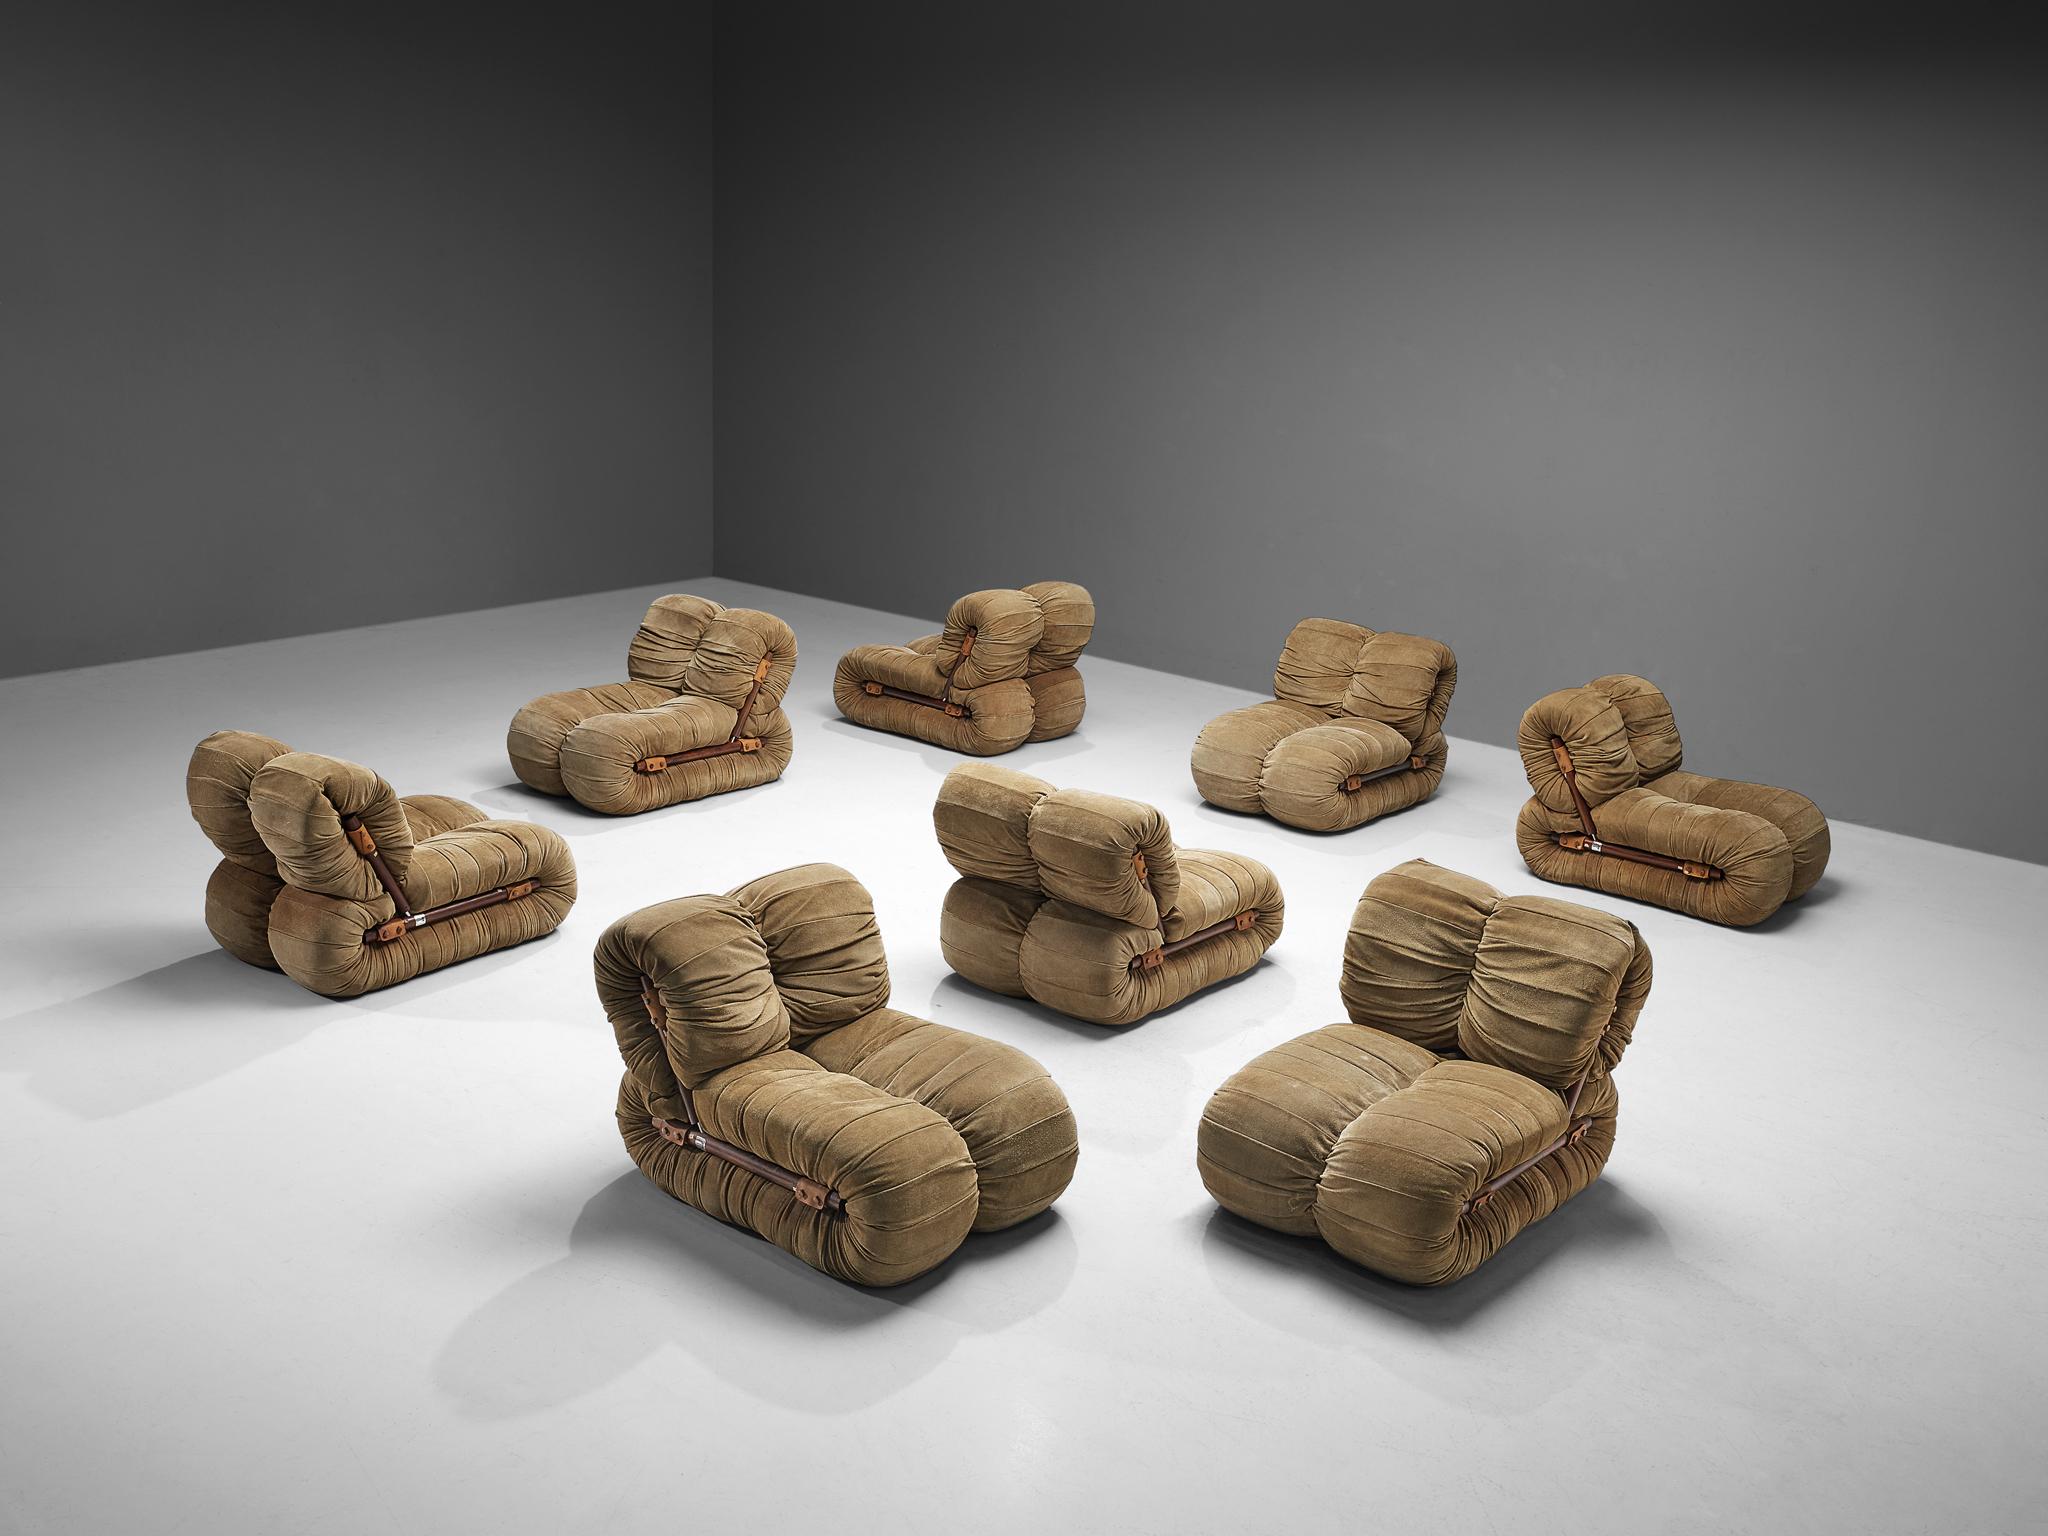 Percival Lafer, lounge chairs, fabric, wood, nubuck leather, Brazil, 1960s
A phenomenal set of eight lounge chairs by designer Percival Lafer. Two L-shaped forms are attached together what characterizes their voluminous and playful appearance. The